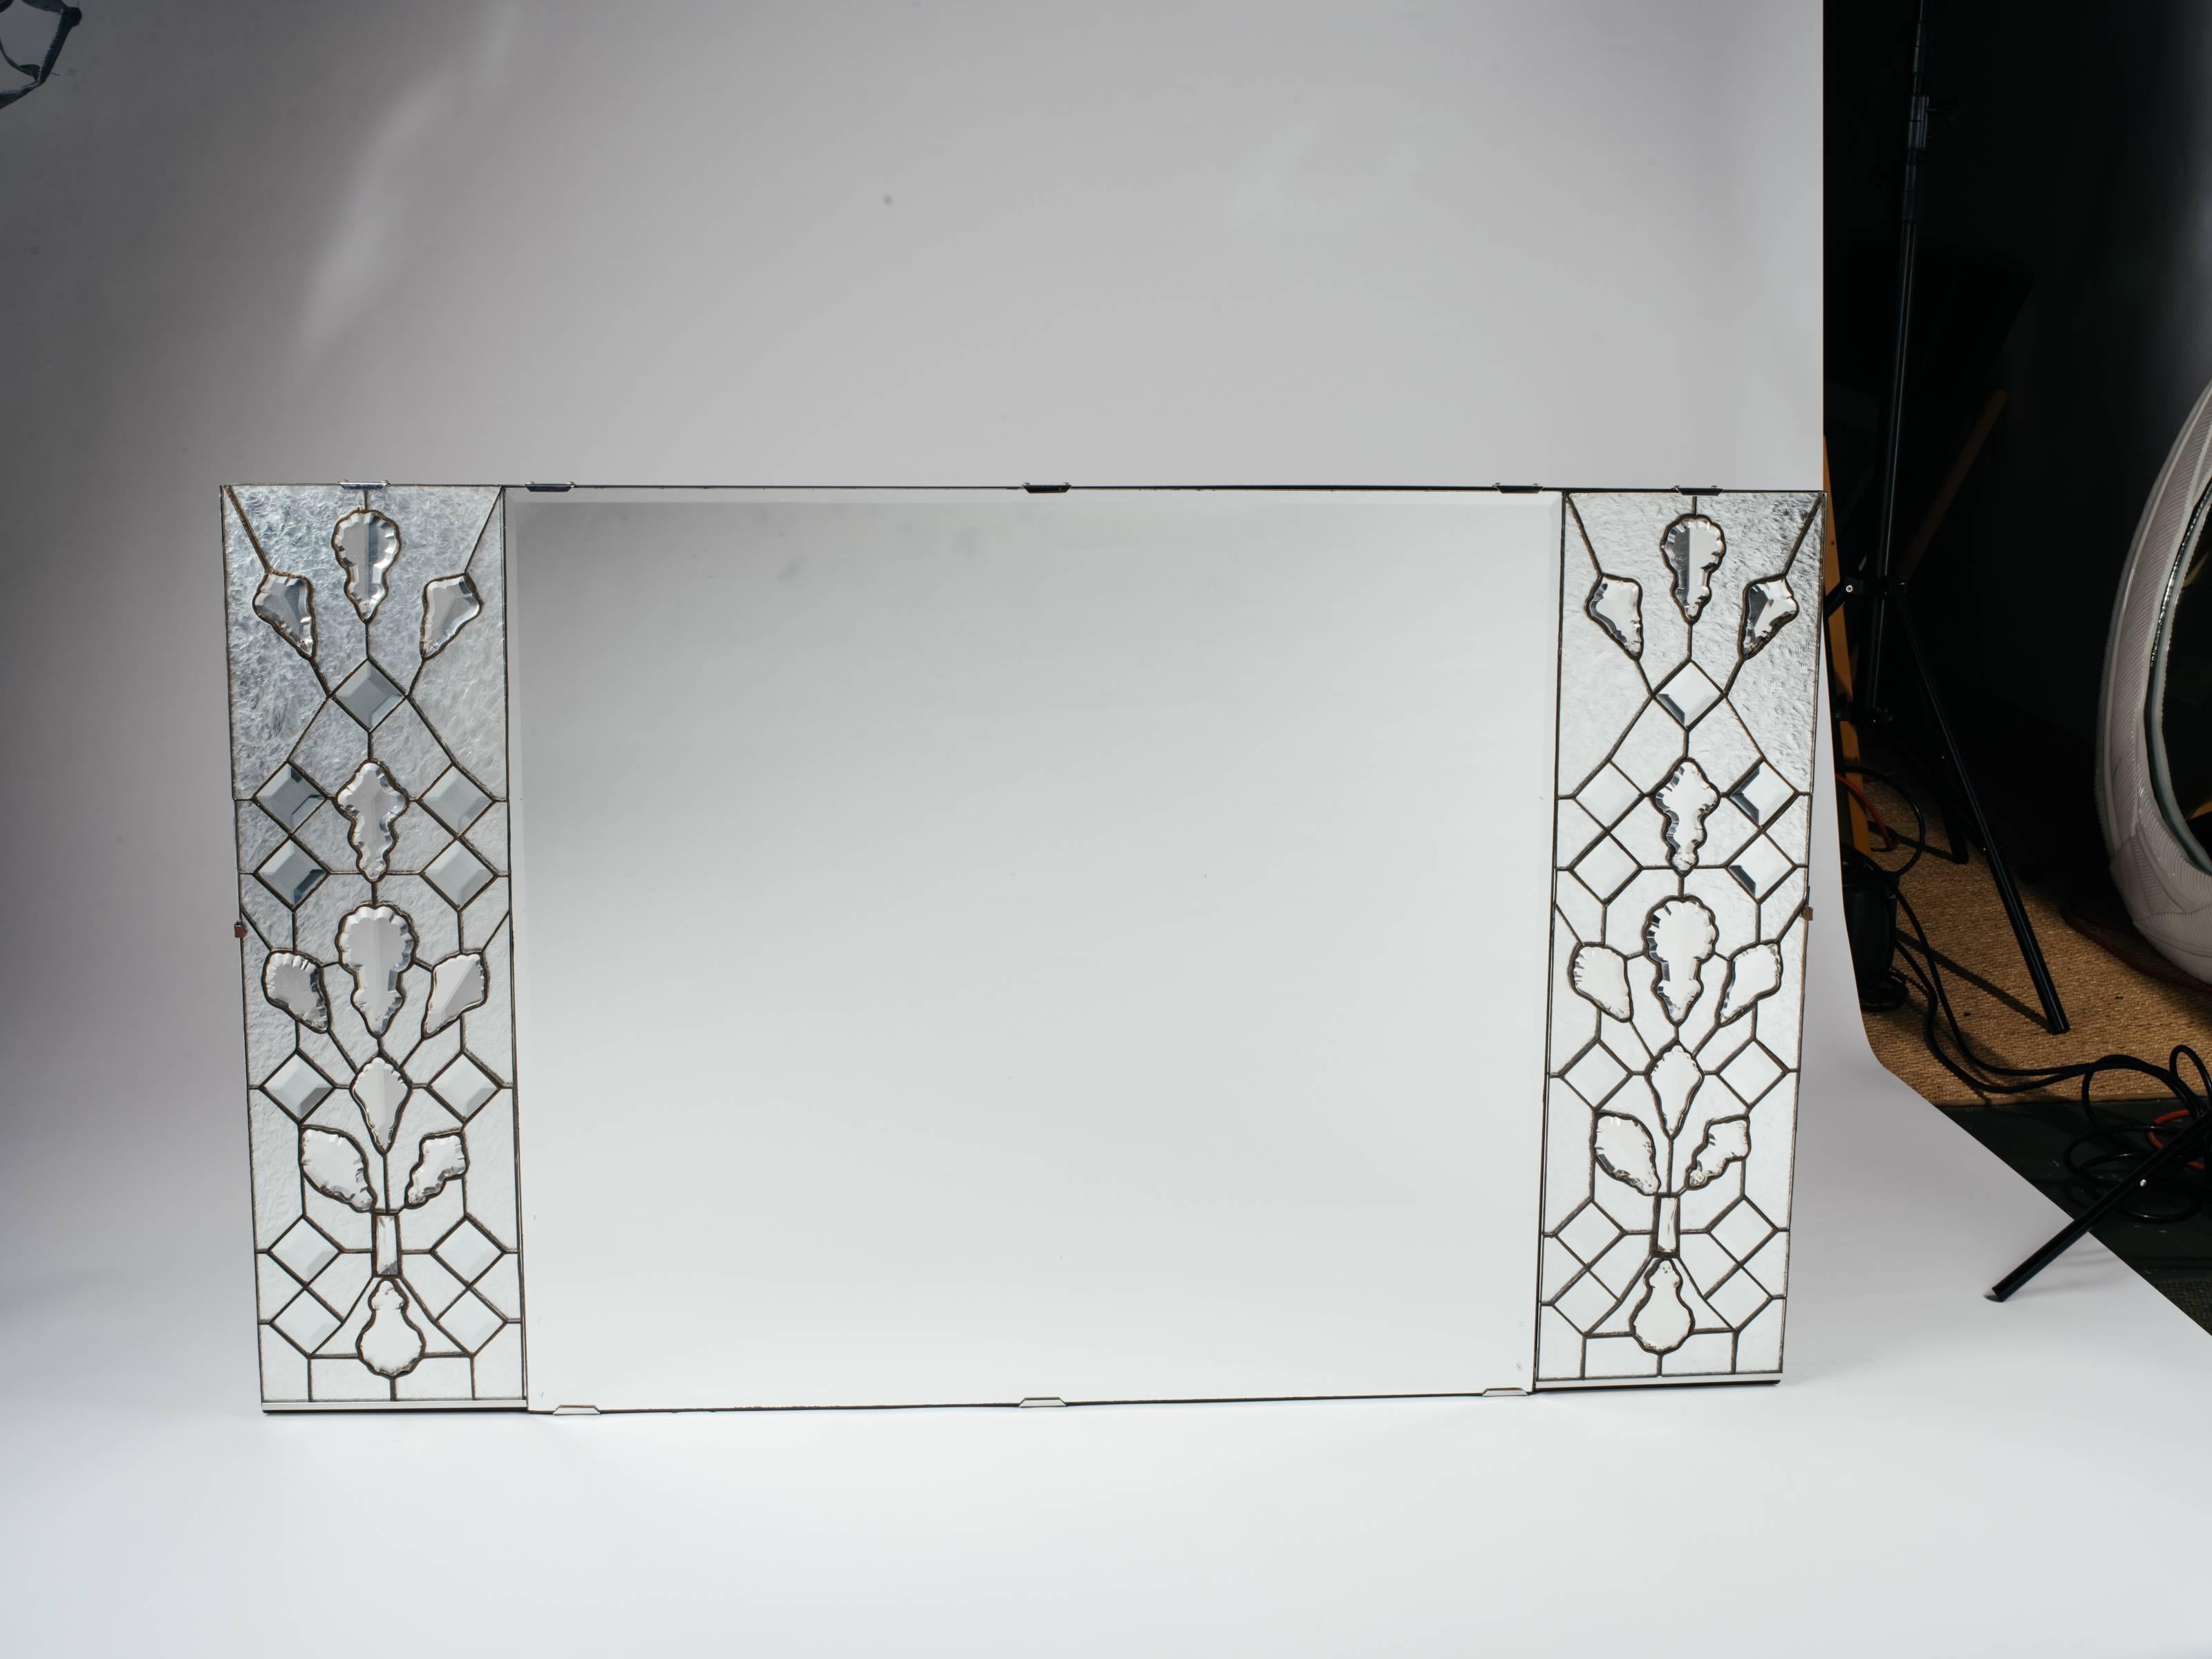 Exquisite 1940s Hollywood Regency rectangular mirror. Features transparent stained glass panels on either side, and fitted with stunning large cut crystals.